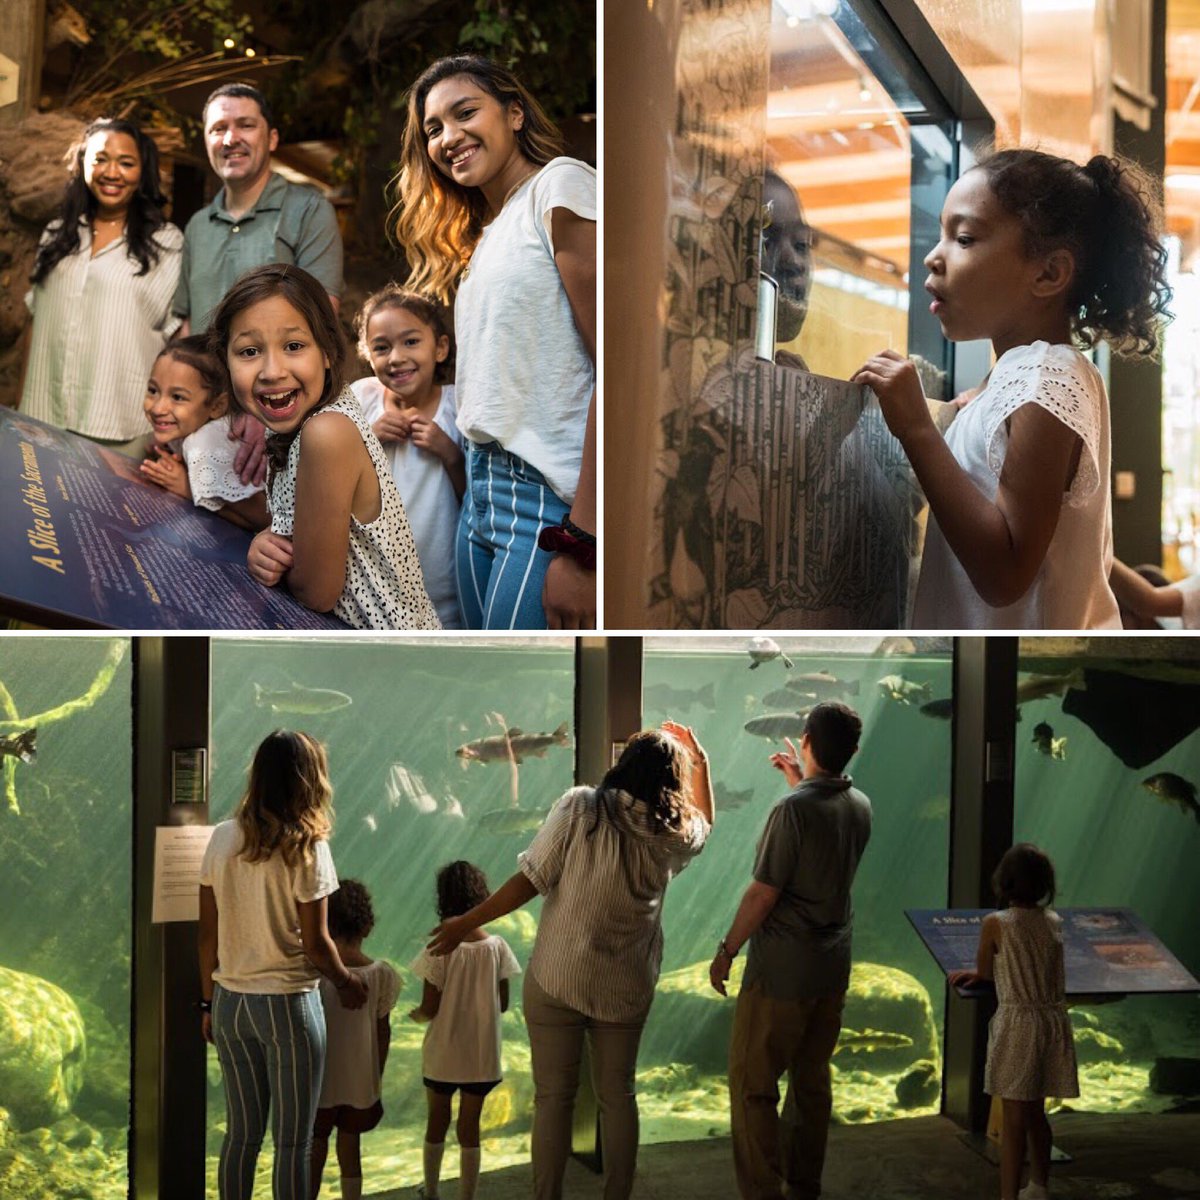 Create family memories at #TurtleBay! Explore our visible river aquarium, playgrounds, animals, historical exhibits, and world-class exhibitions! Access is included with paid Park admission and always free for members. Learn more at turtlebay.org!